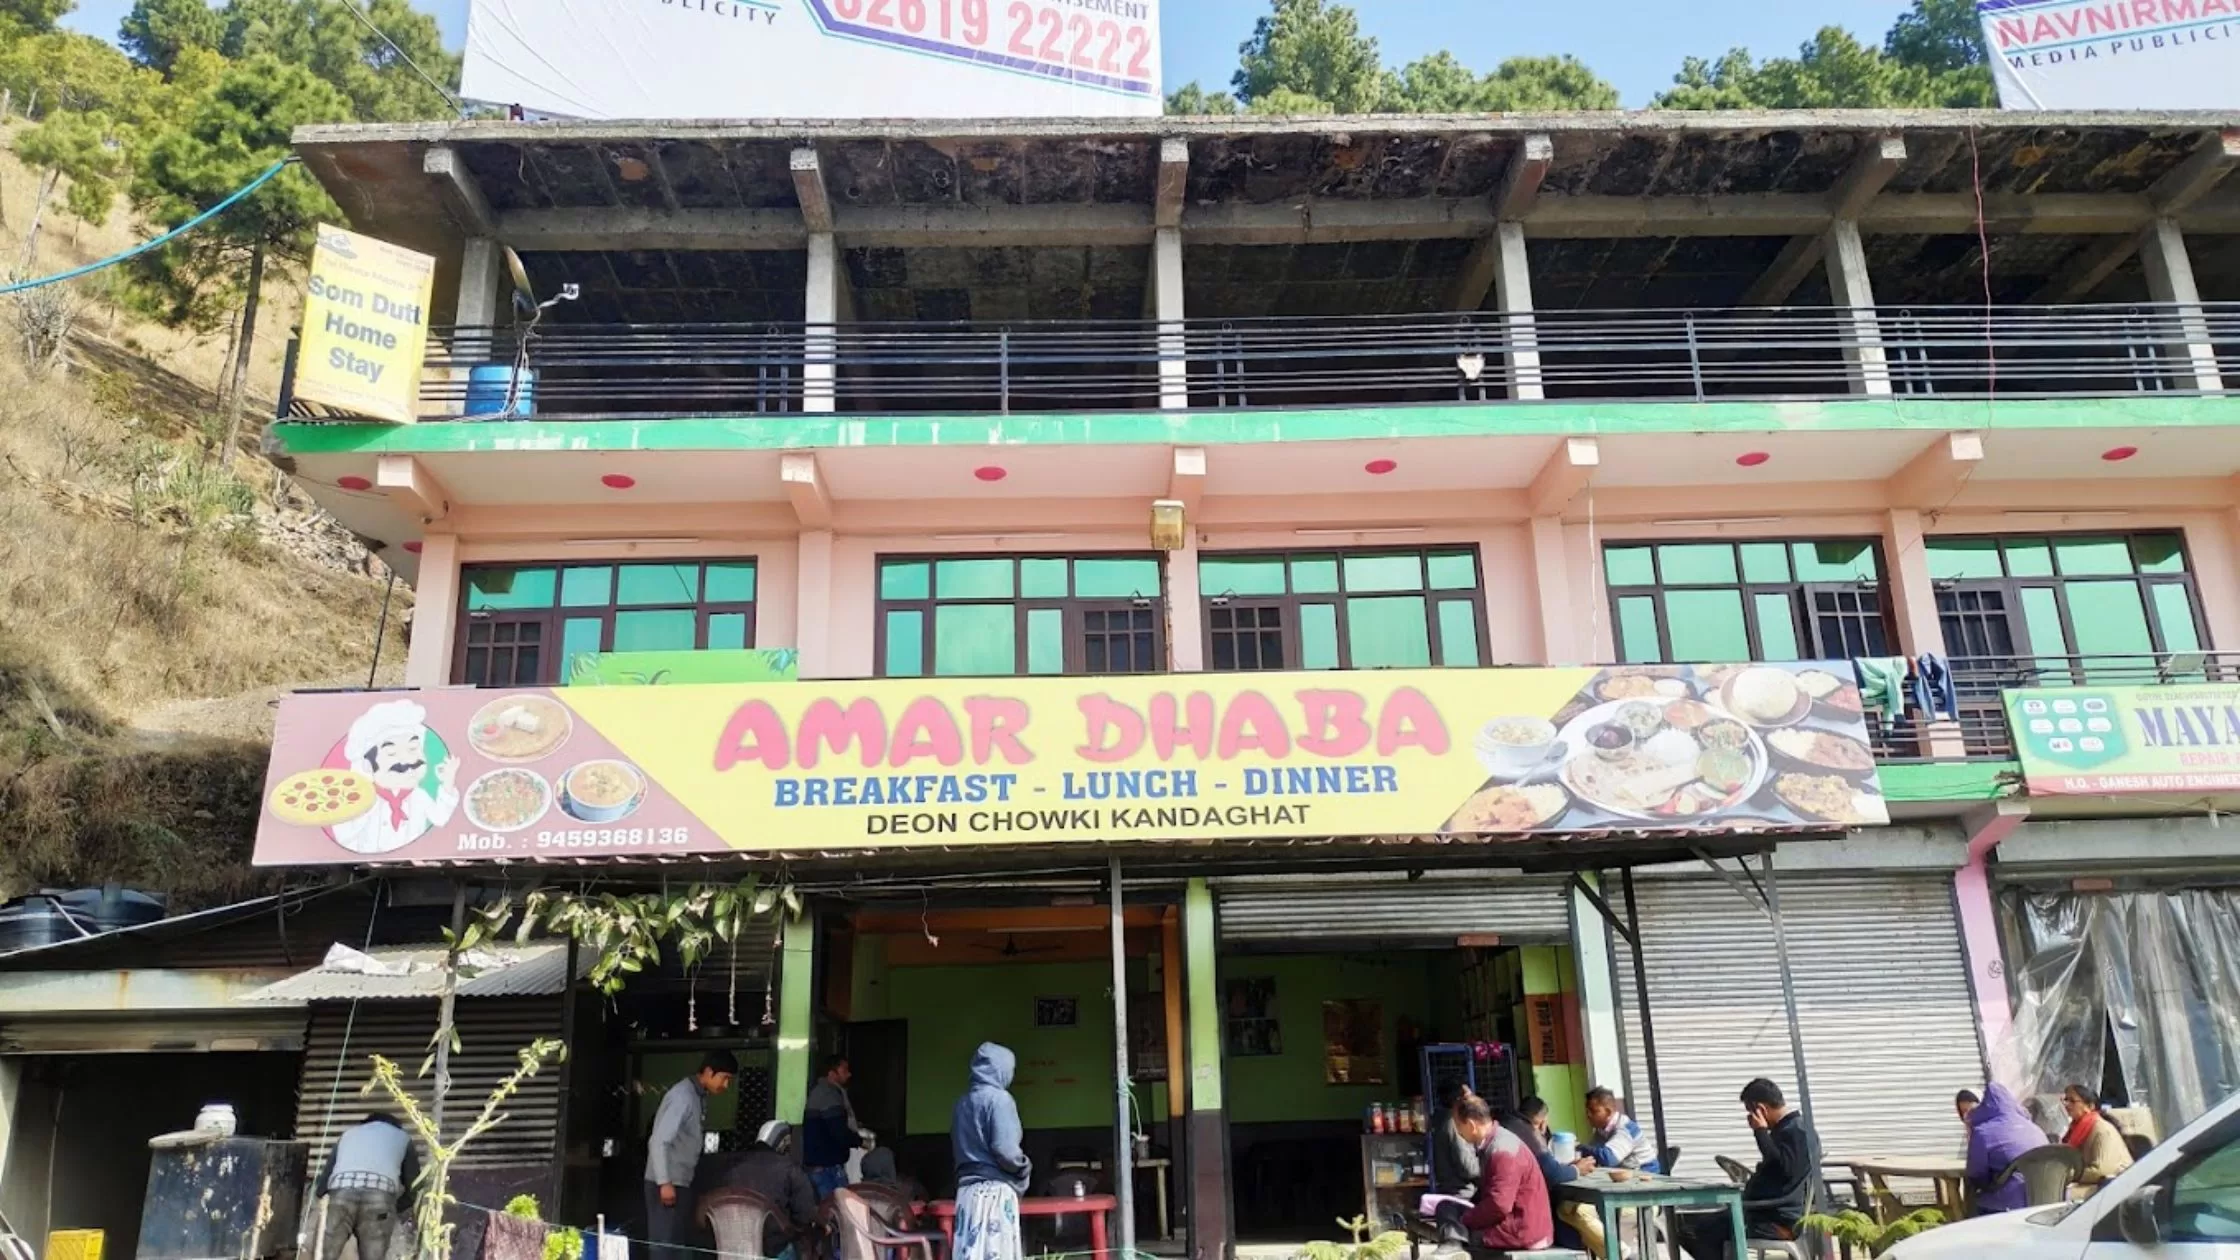 Outside view of Amar Dhaba